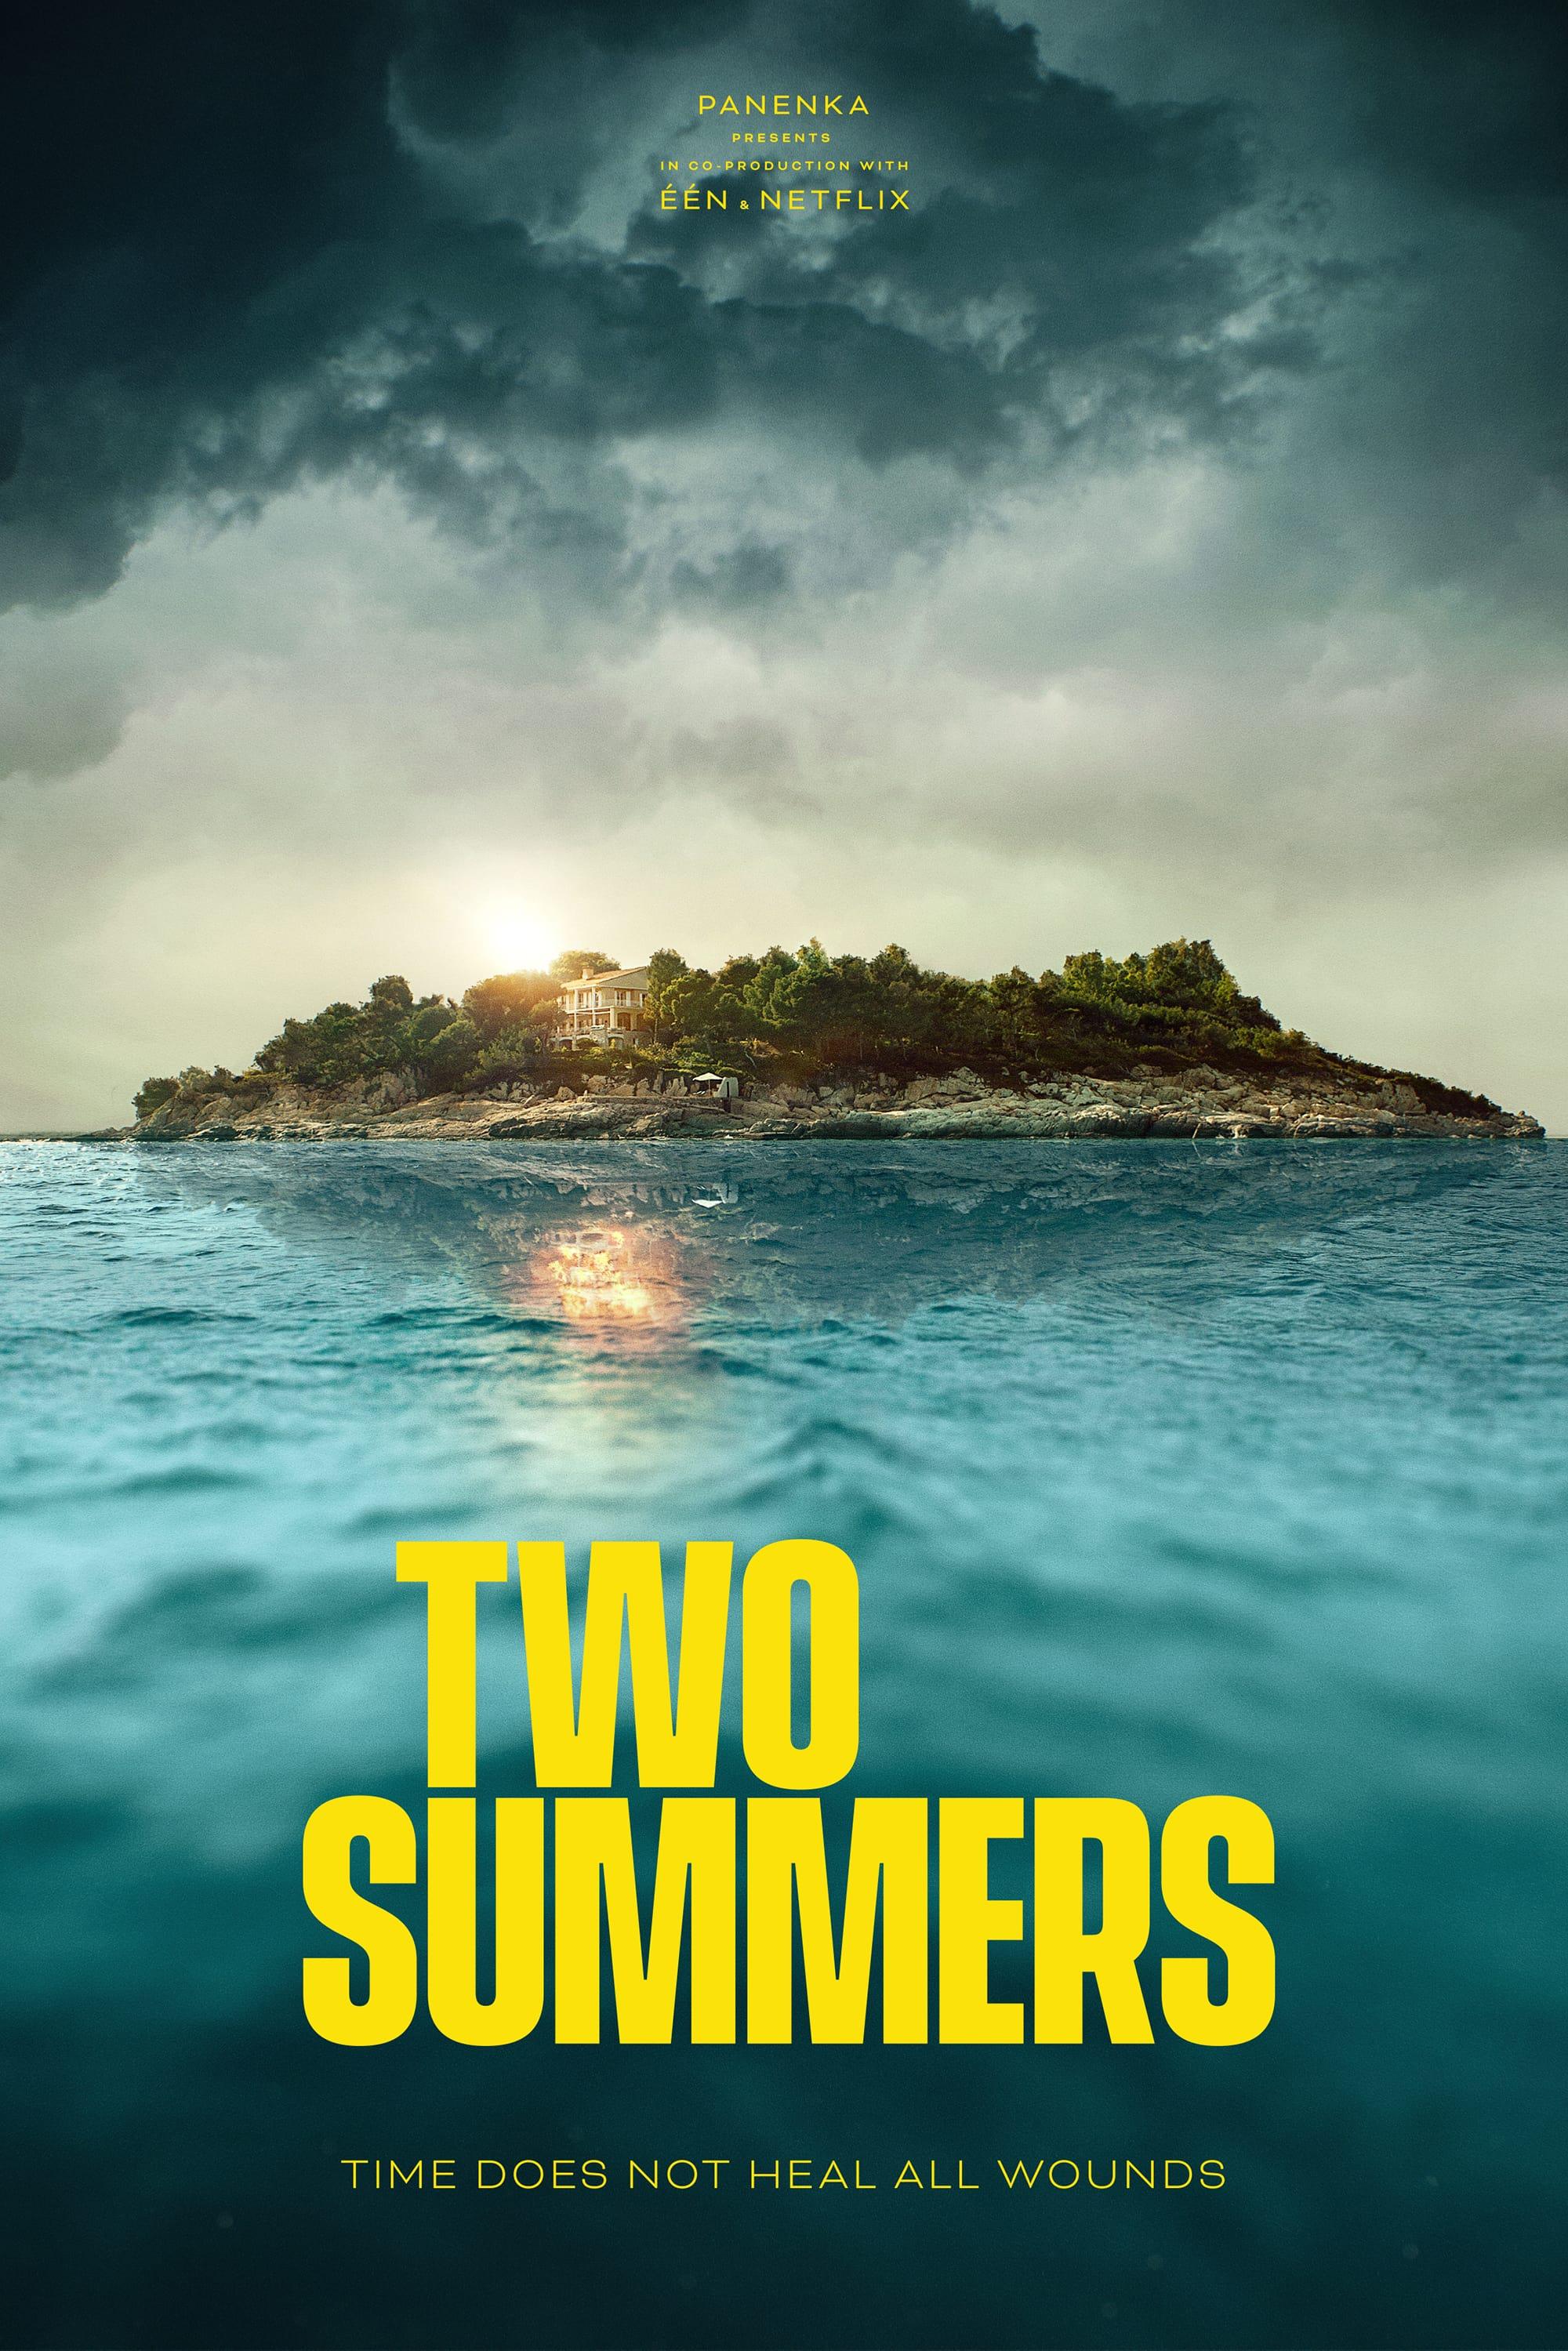 TV ratings for Twee Zomers (Two Summers) in Mexico. Eén TV series